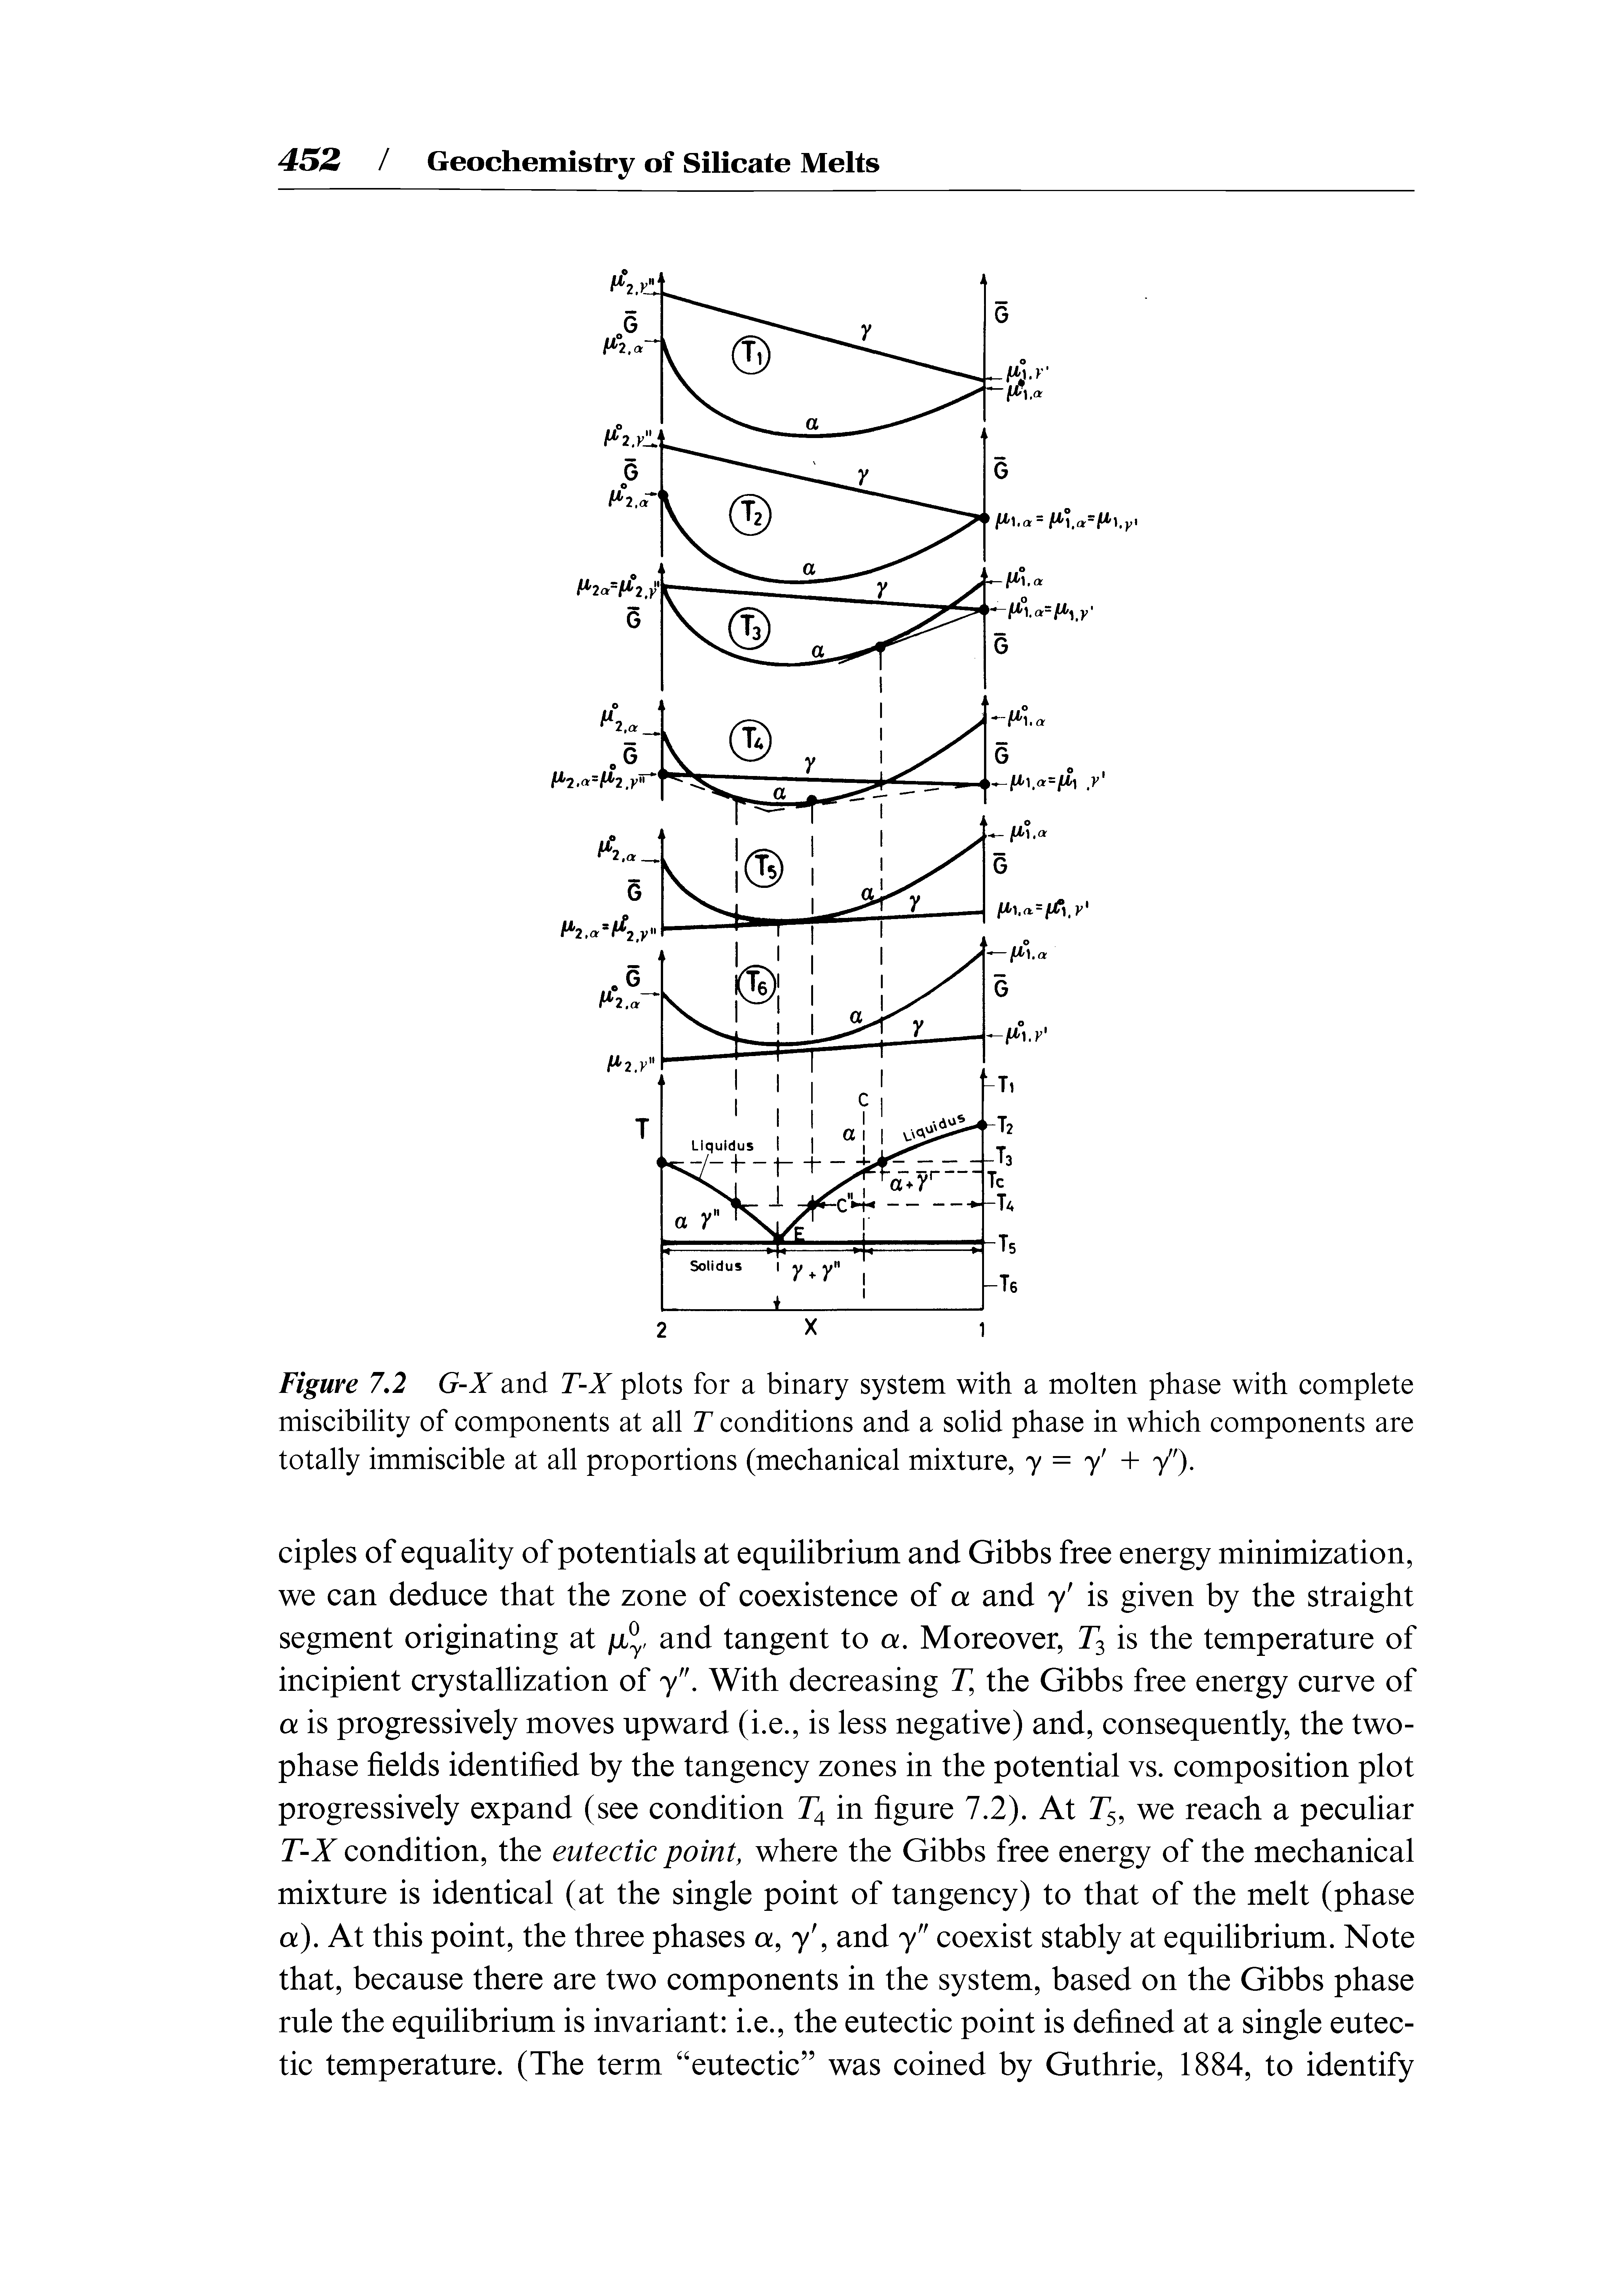 Figure 7.2 G-X and T-X plots for a binary system with a molten phase with complete miscibility of components at all T conditions and a solid phase in which components are totally immiscible at all proportions (mechanical mixture, 7 = 7 + V )-...